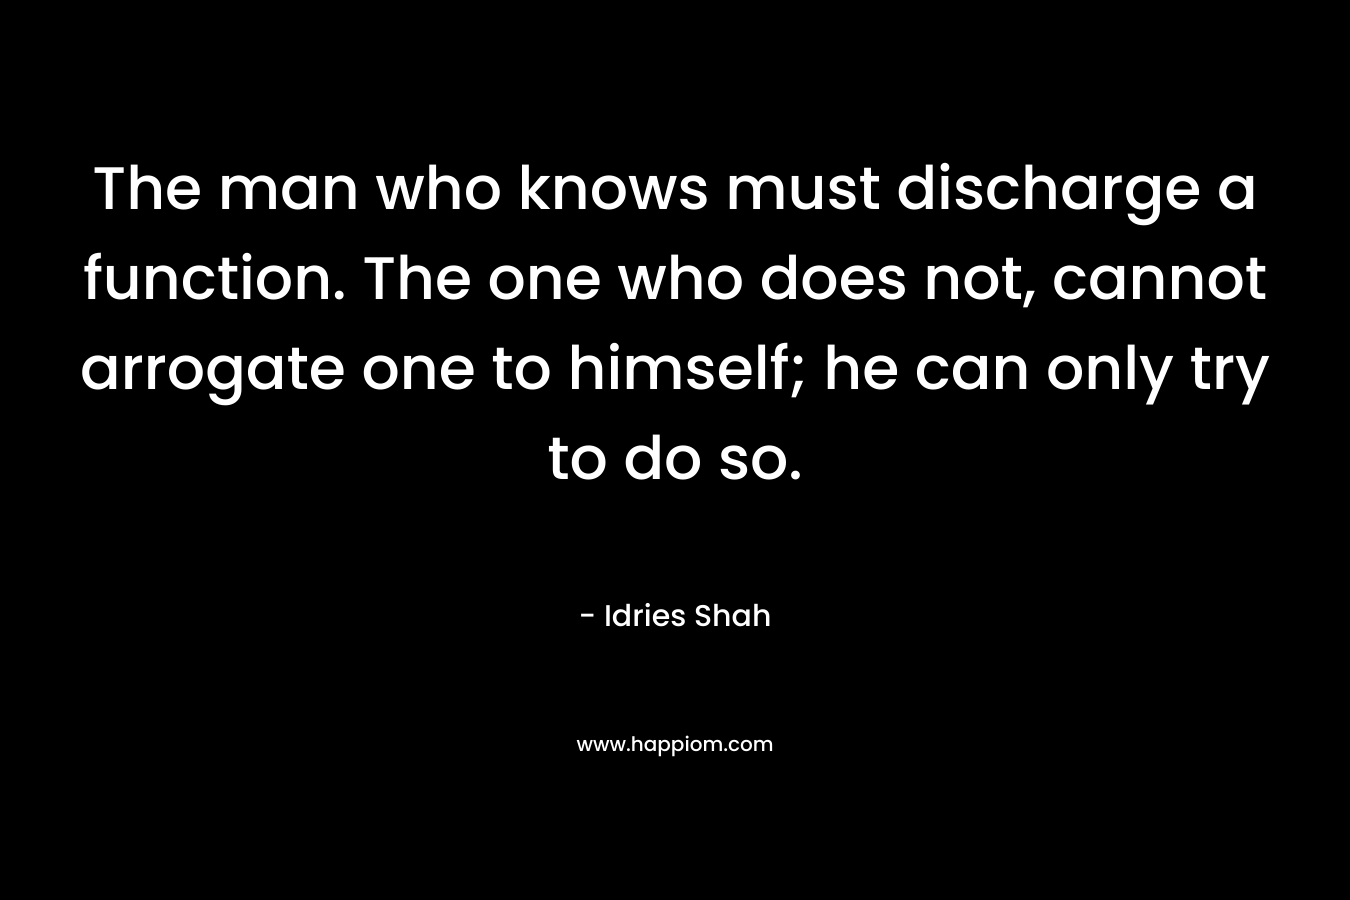 The man who knows must discharge a function. The one who does not, cannot arrogate one to himself; he can only try to do so.